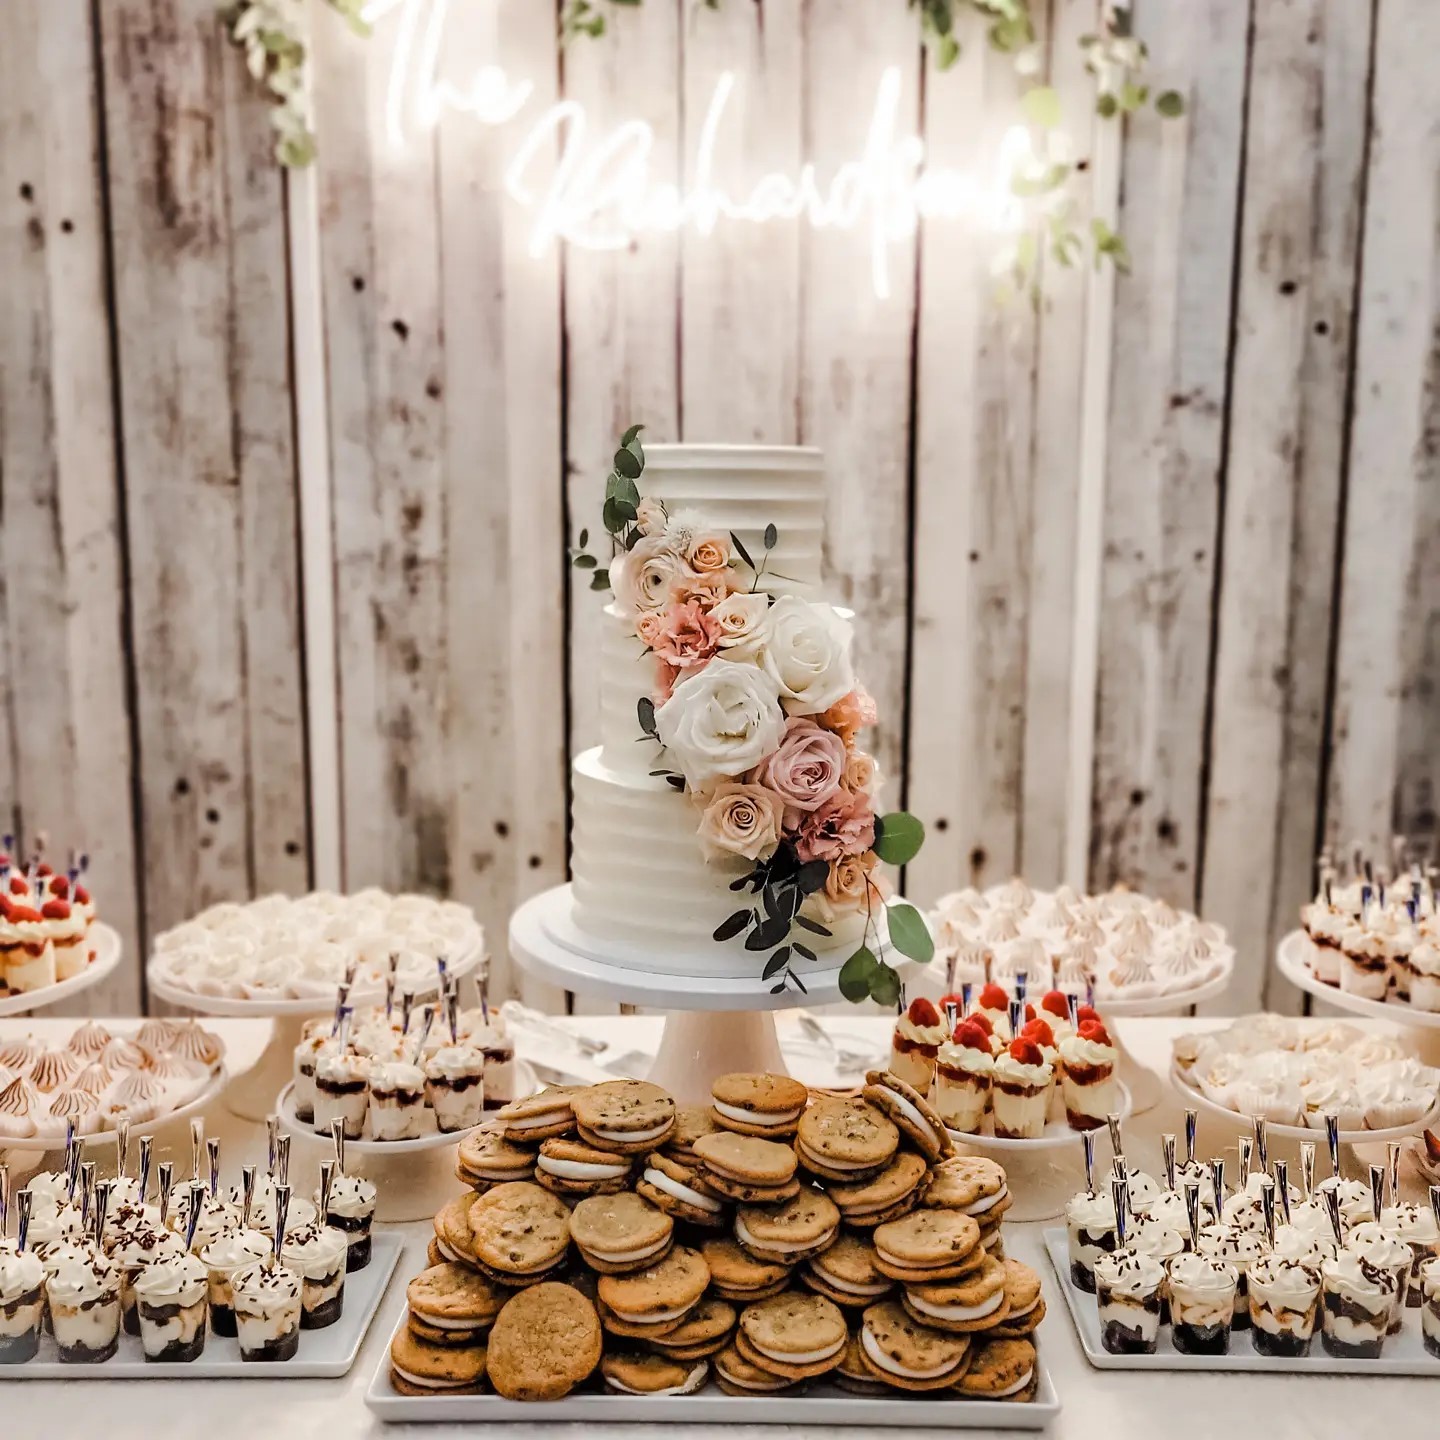 A white three tiered wedding cake with flowers sits in the center of a dessert table